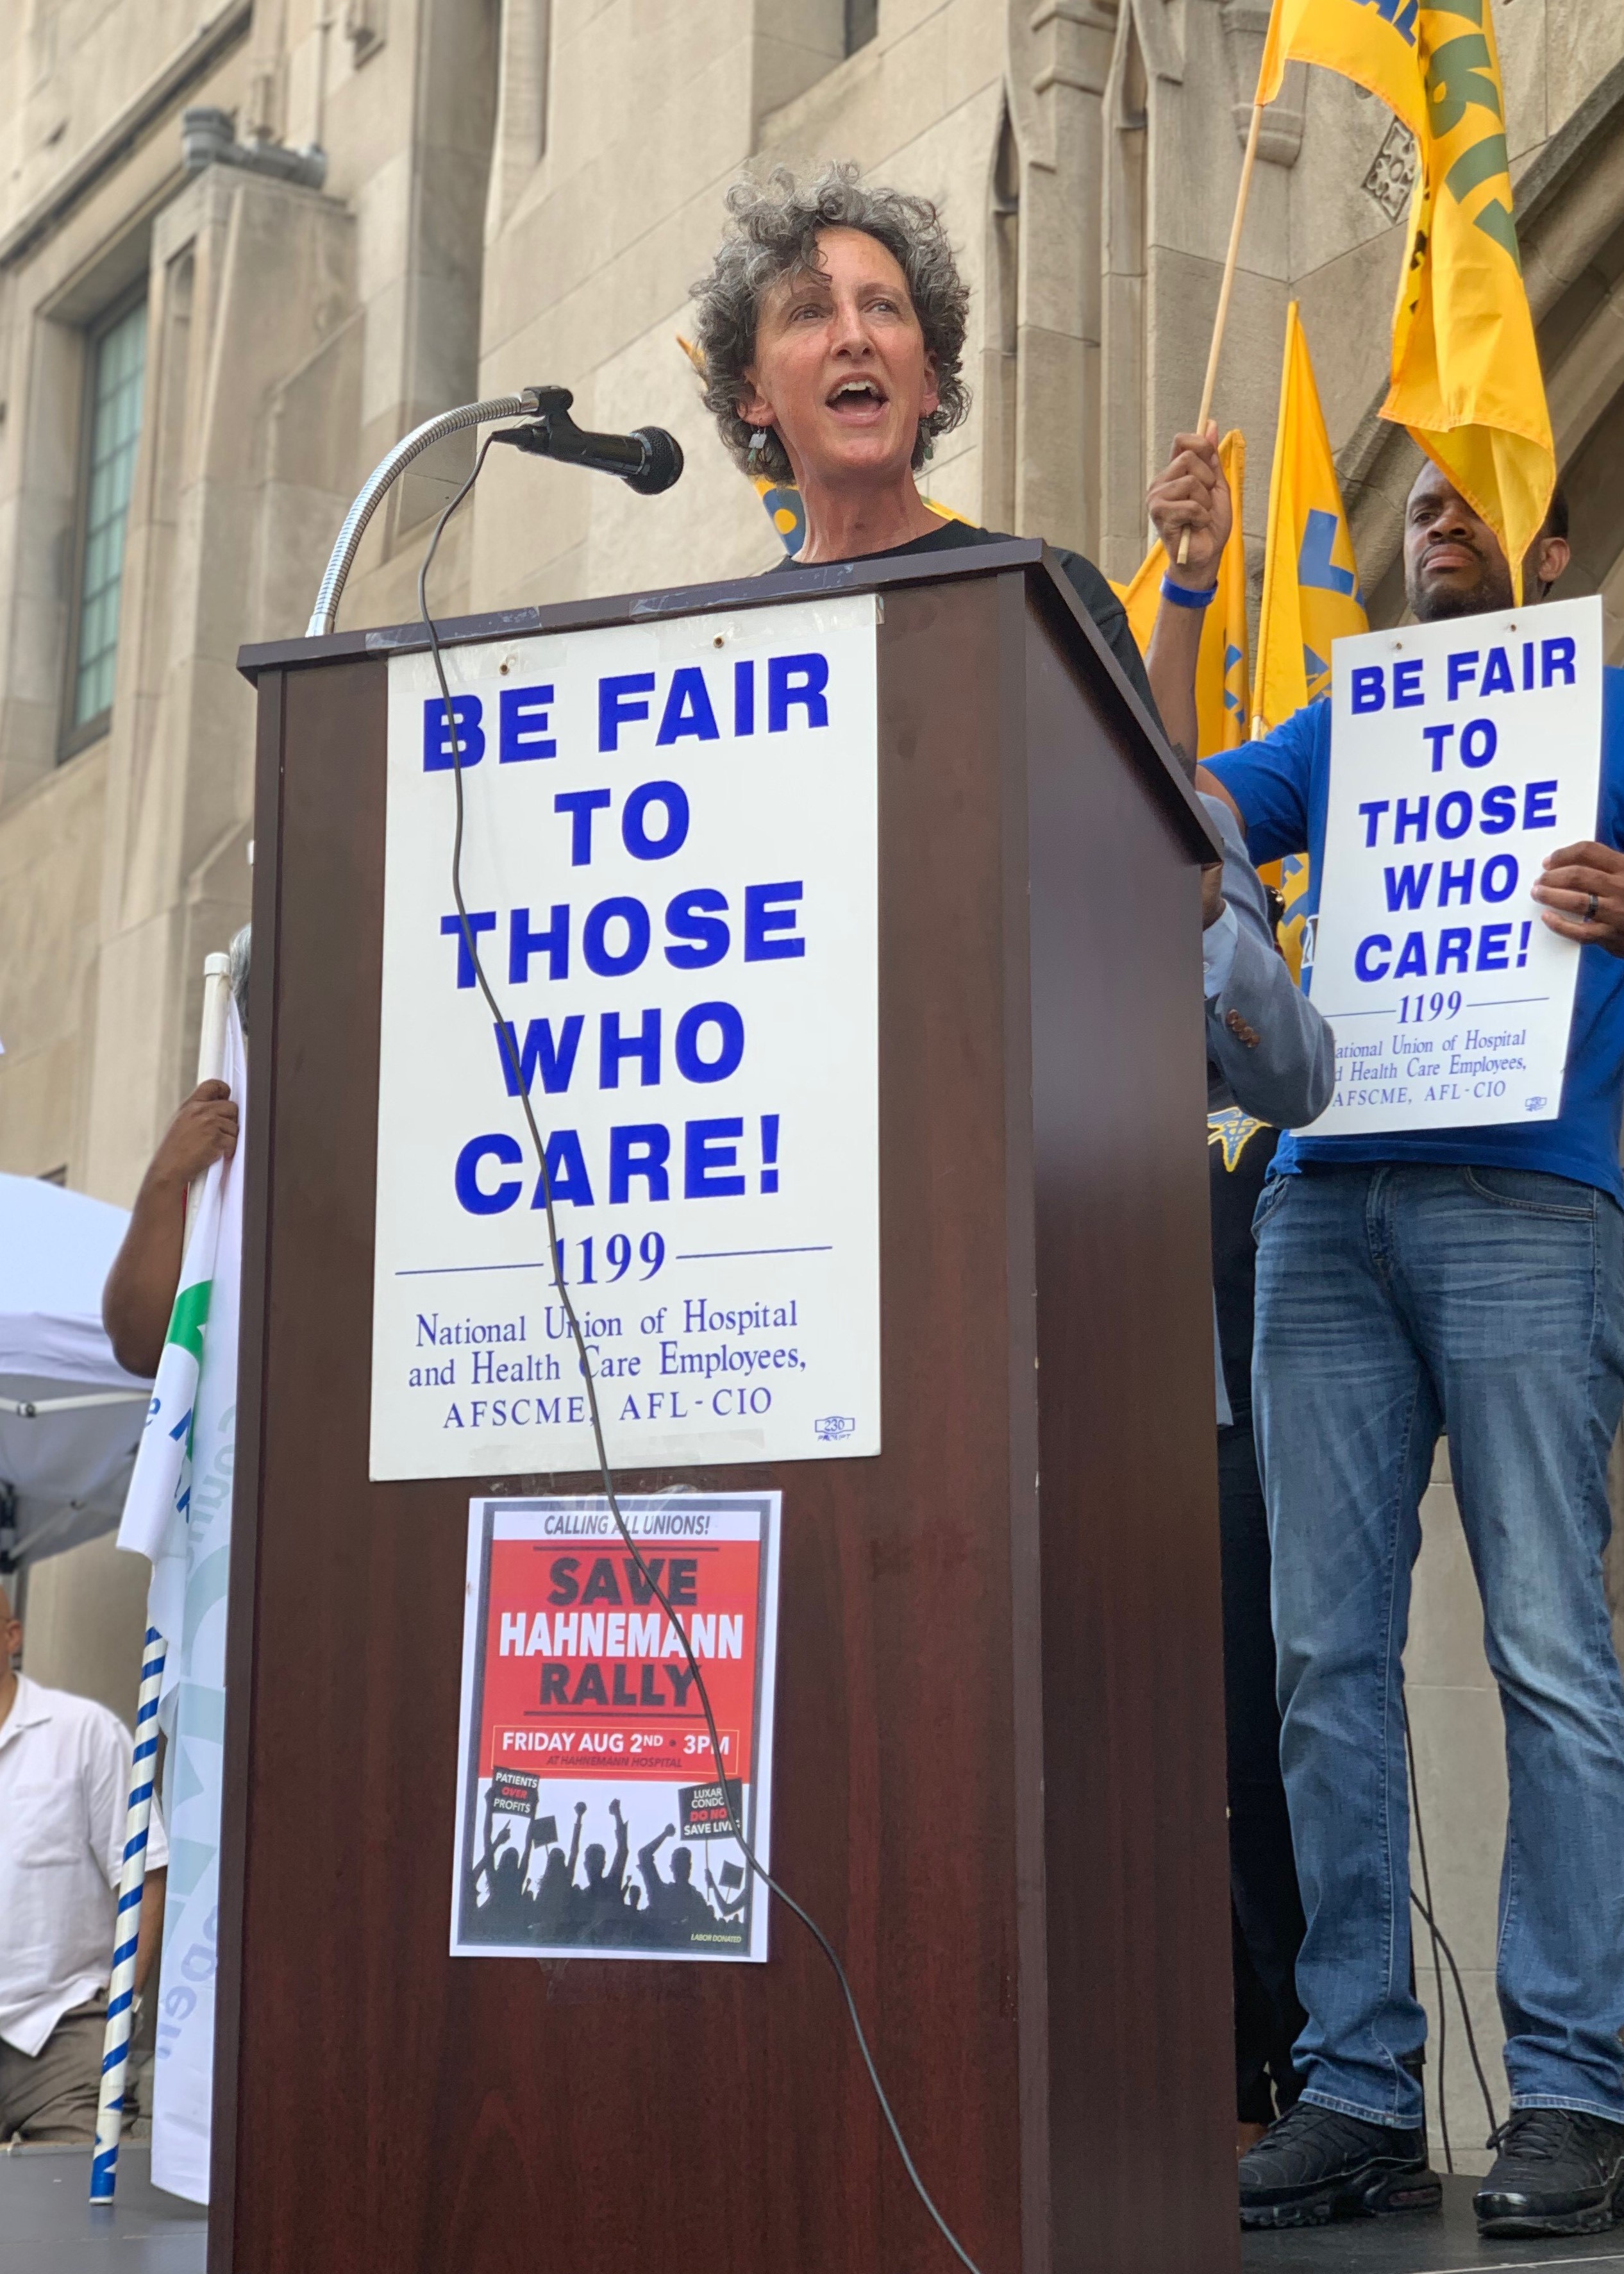 S-T McBride at PA Hospital Rally: ‘We Don’t Put Corporate Greed over Human Need’